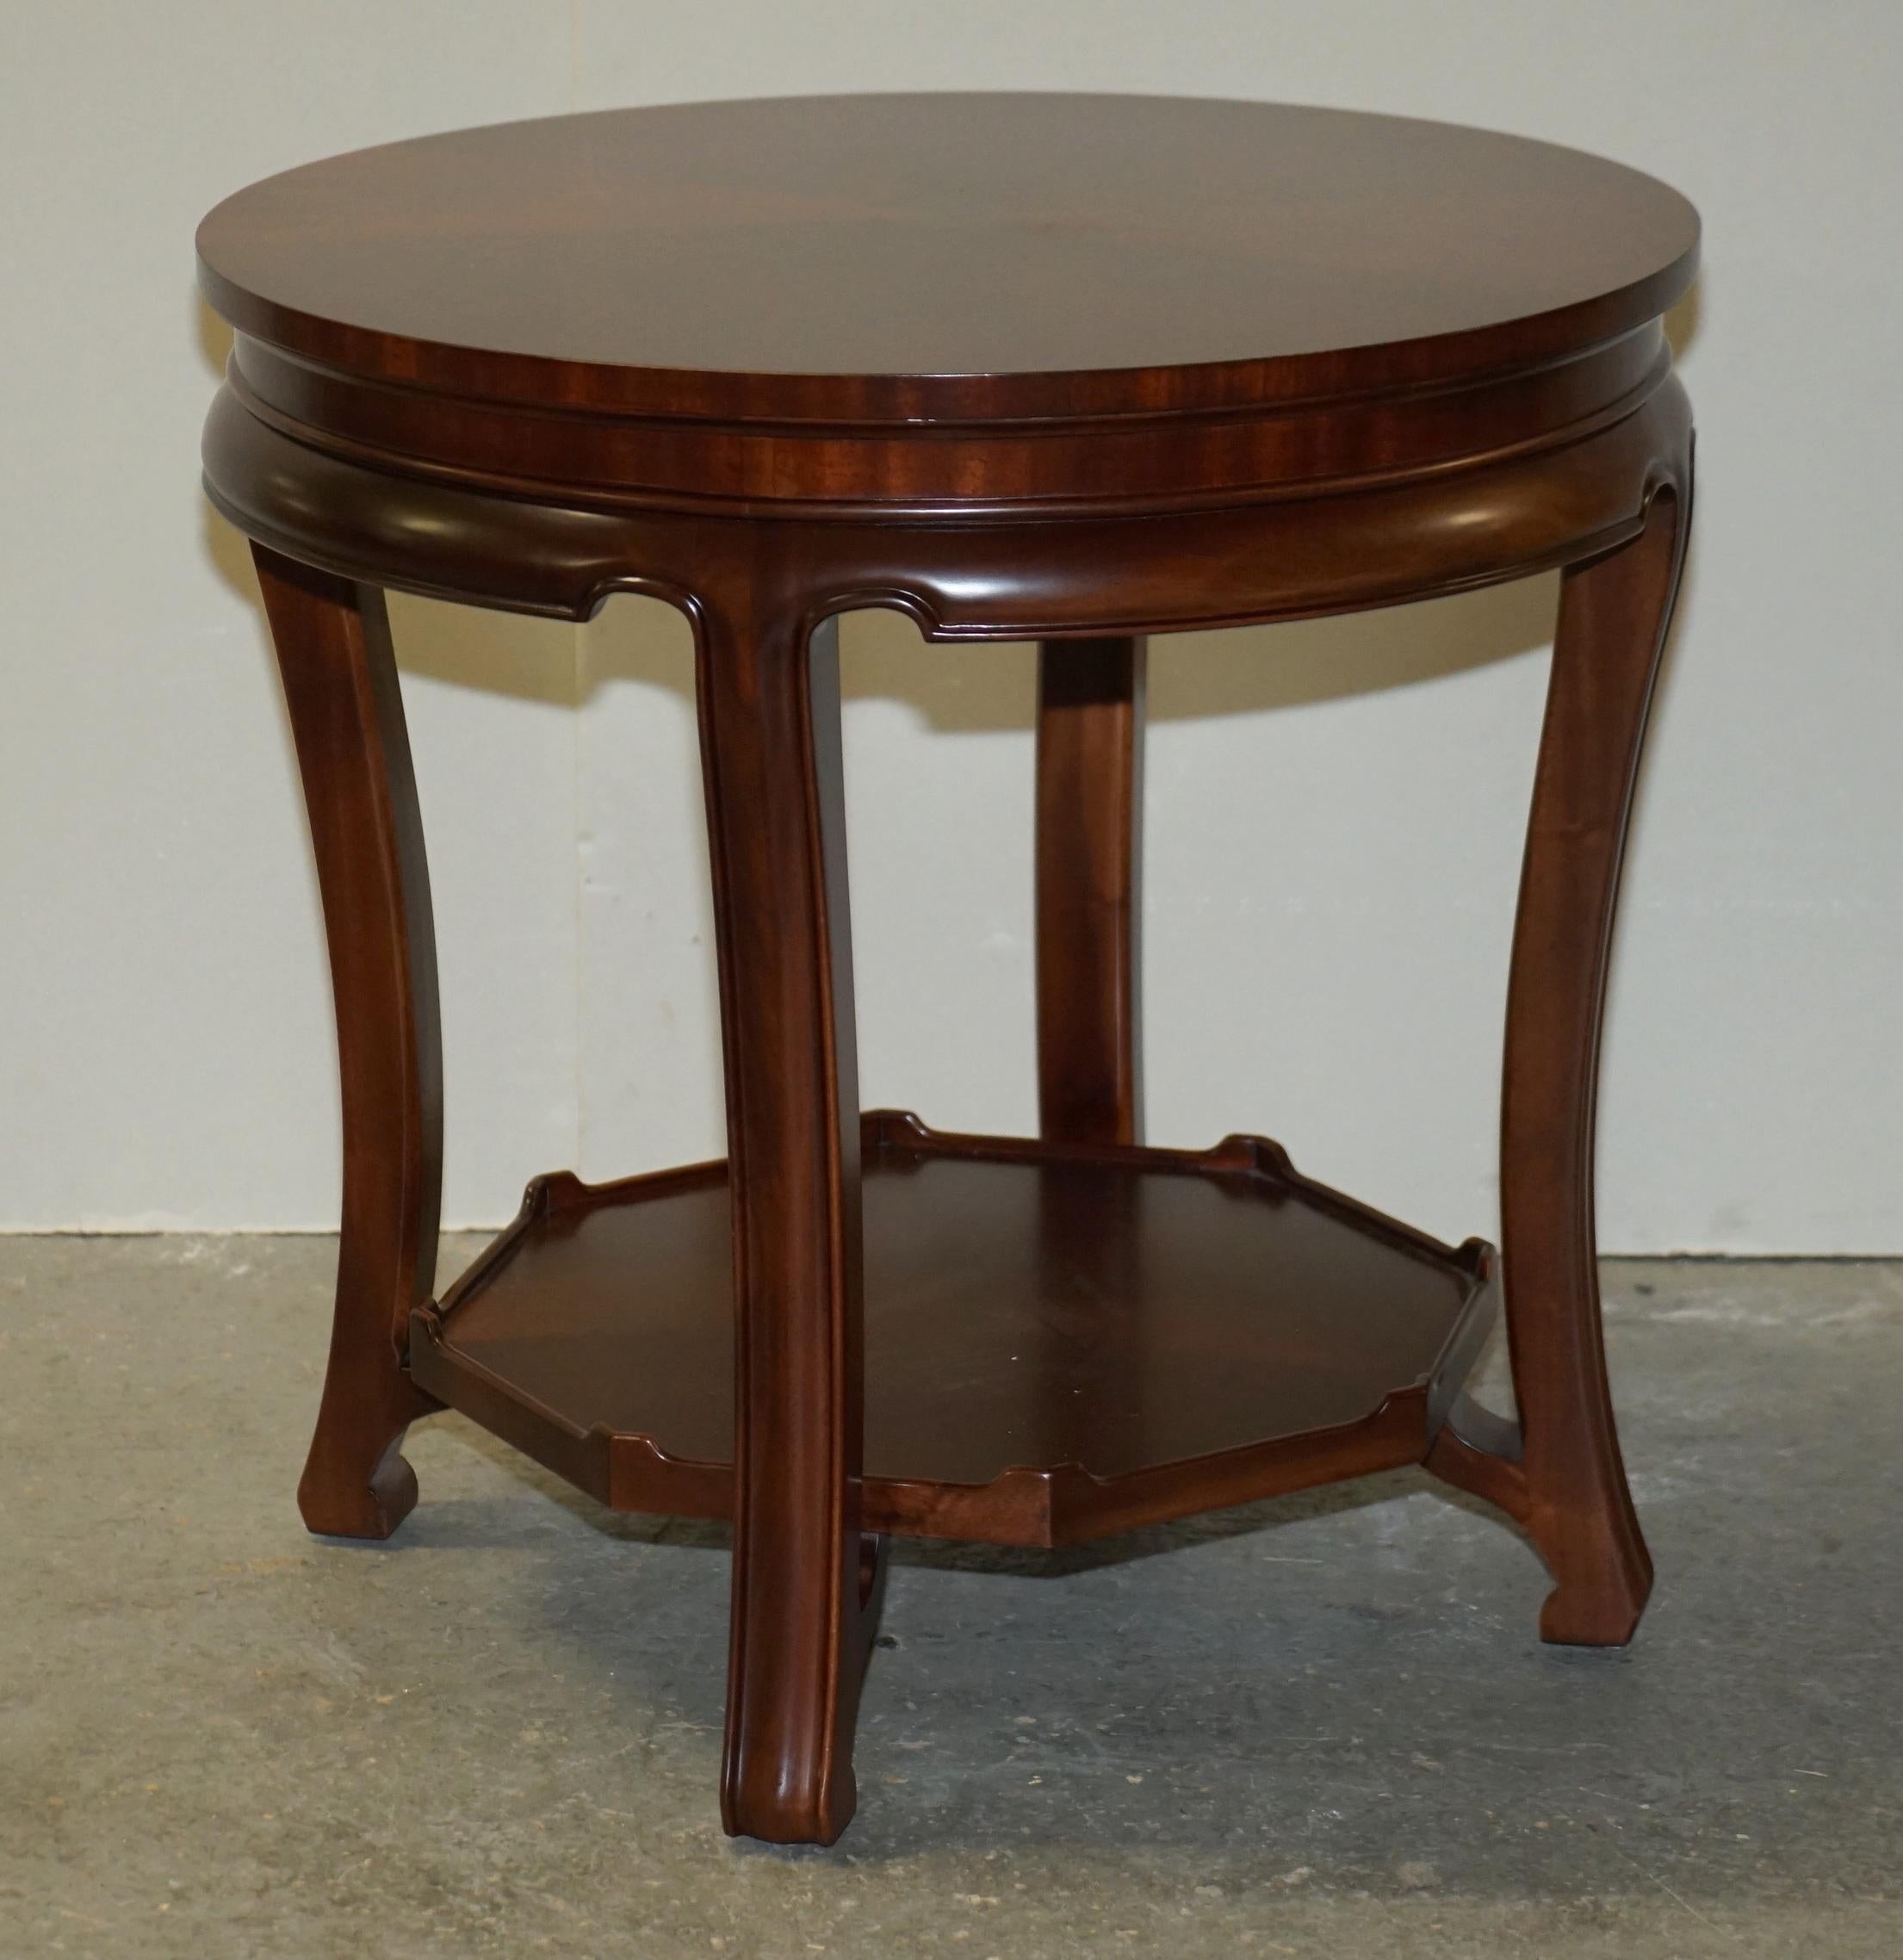 Royal House Antiques

Royal House Antiques is delighted to offer for sale this exquisite pair of RRP £10,050 Ralph Lauren American Mahogany side end lamp wine tables

Please note the delivery fee listed is just a guide, it covers within the M25 only